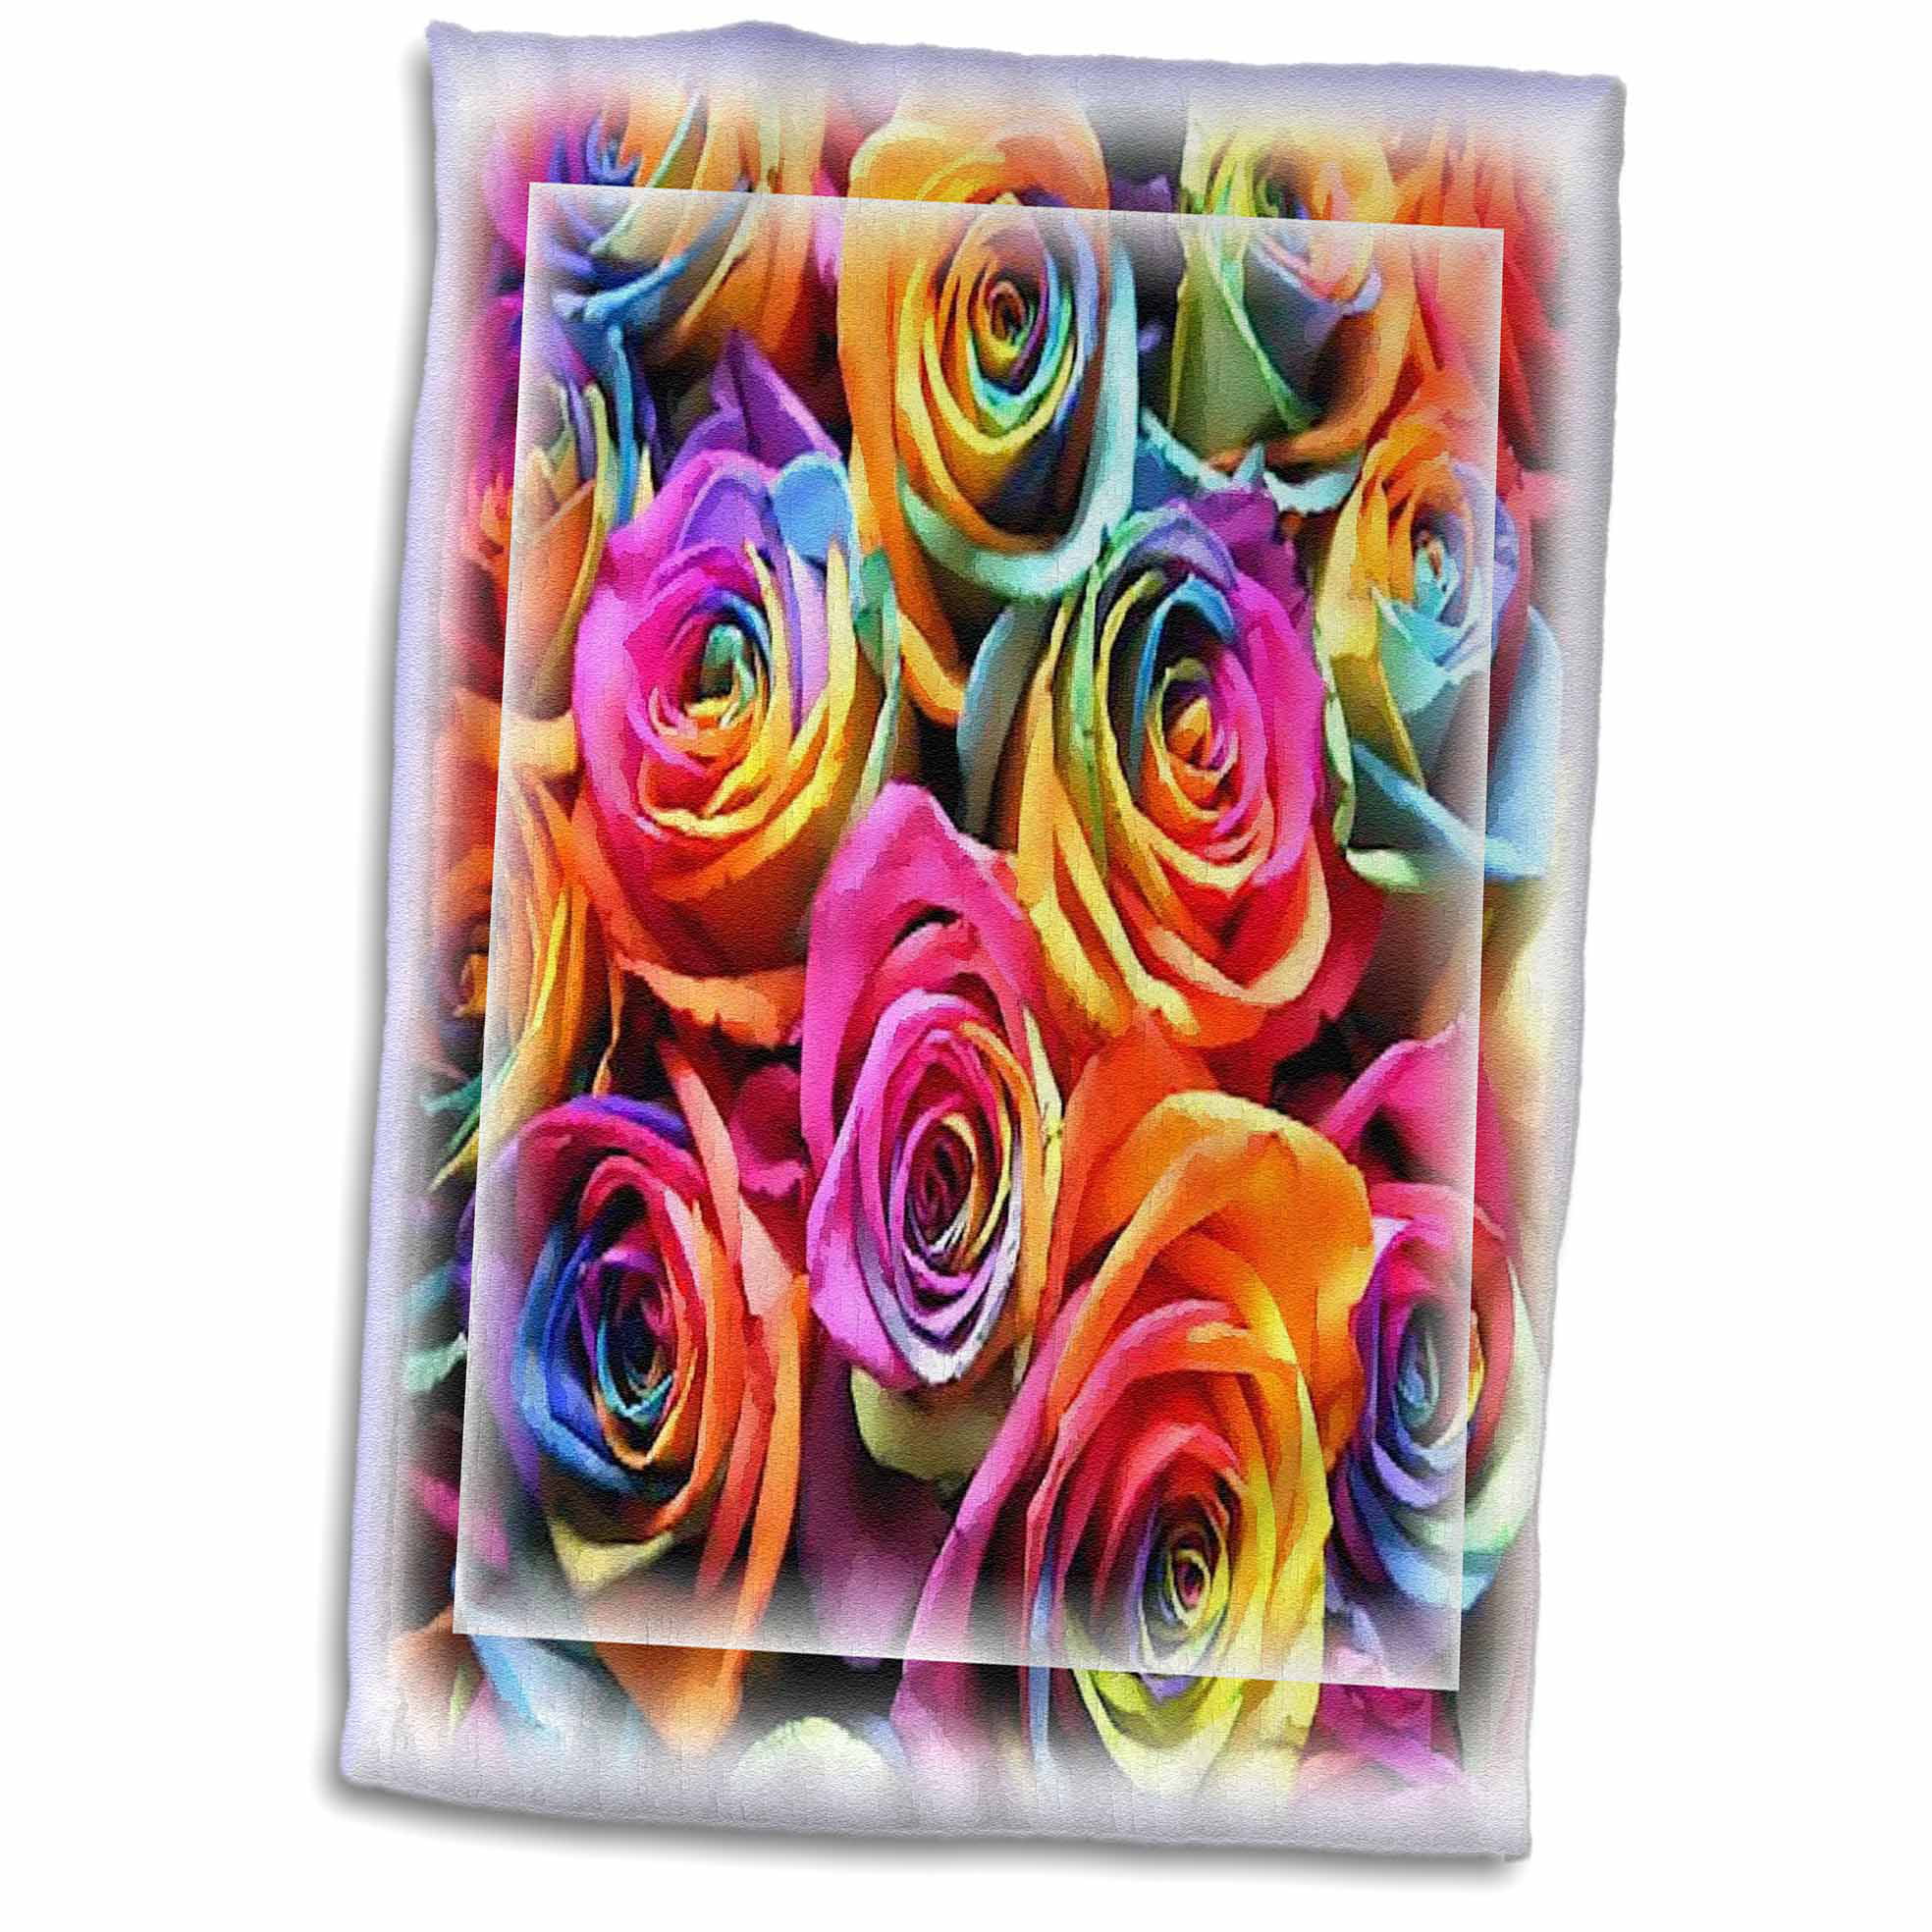 15 x 22 3D Rose Red and White Chevron Pattern Towel Multicolor